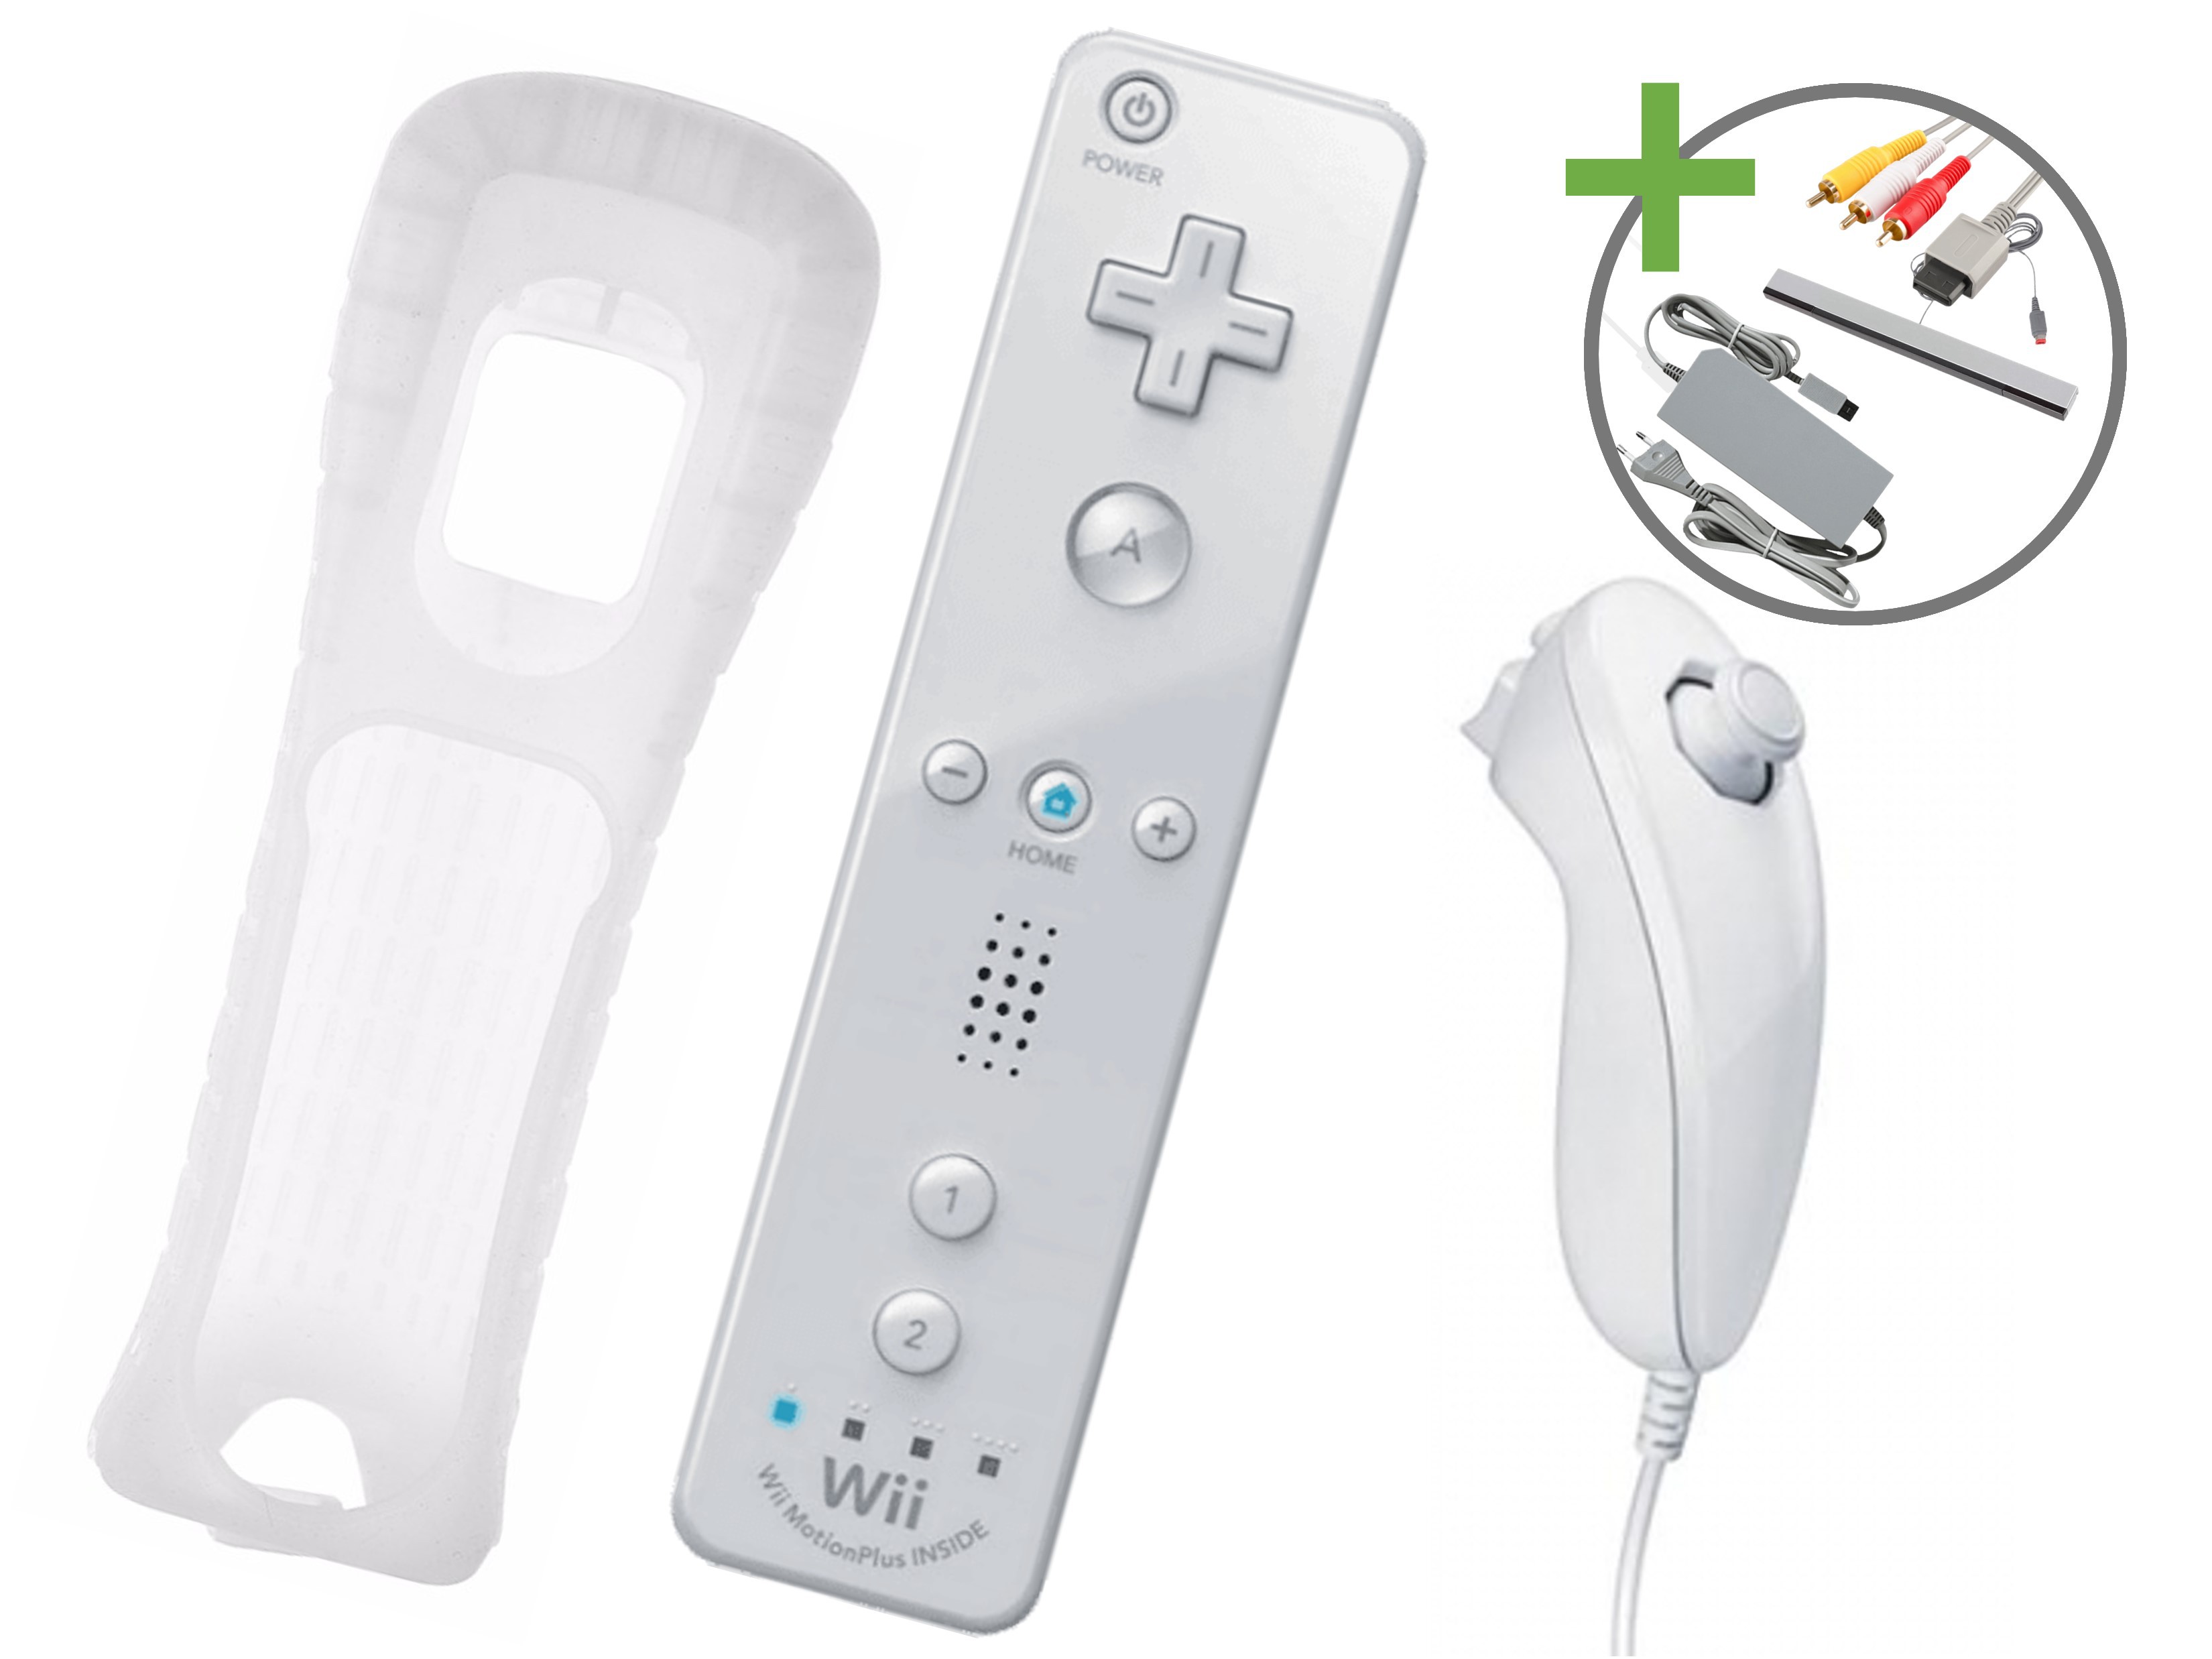 Nintendo Wii Starter Pack - Wii Family Edition - Wii Hardware - 3